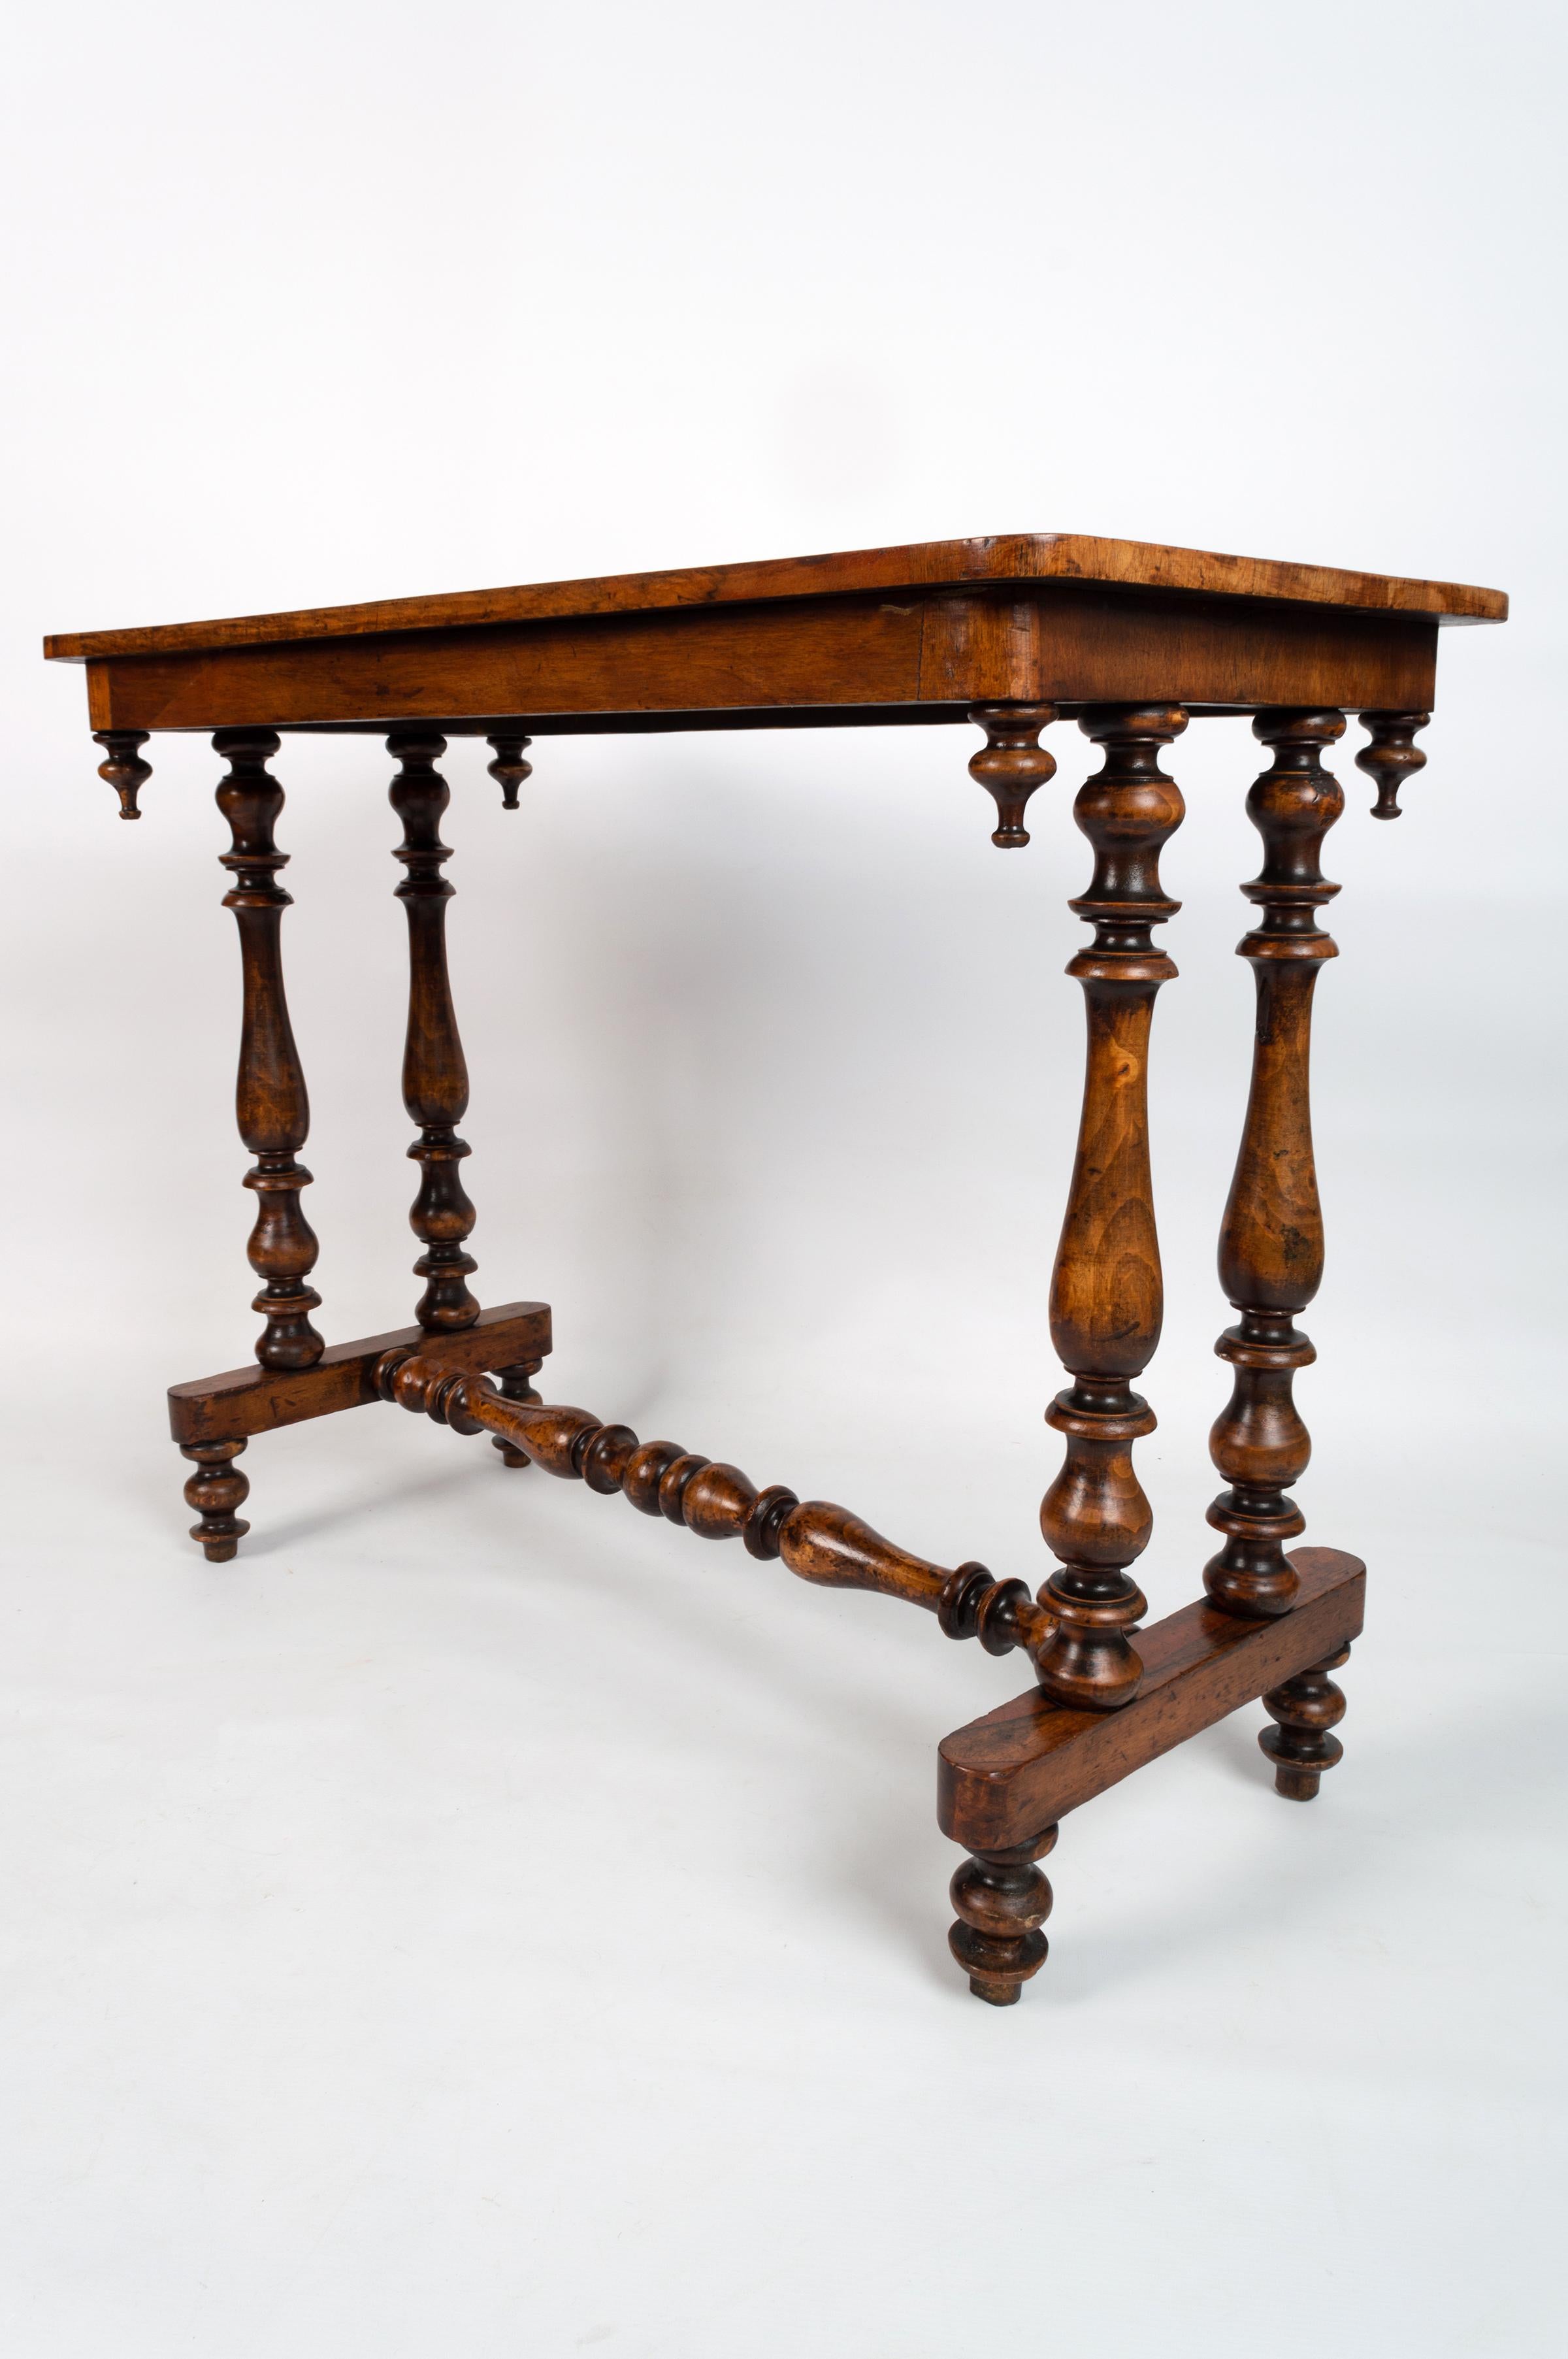 Early 20th Century Antique English Edwardian Inlaid Walnut Hall Table Console C.1900 For Sale